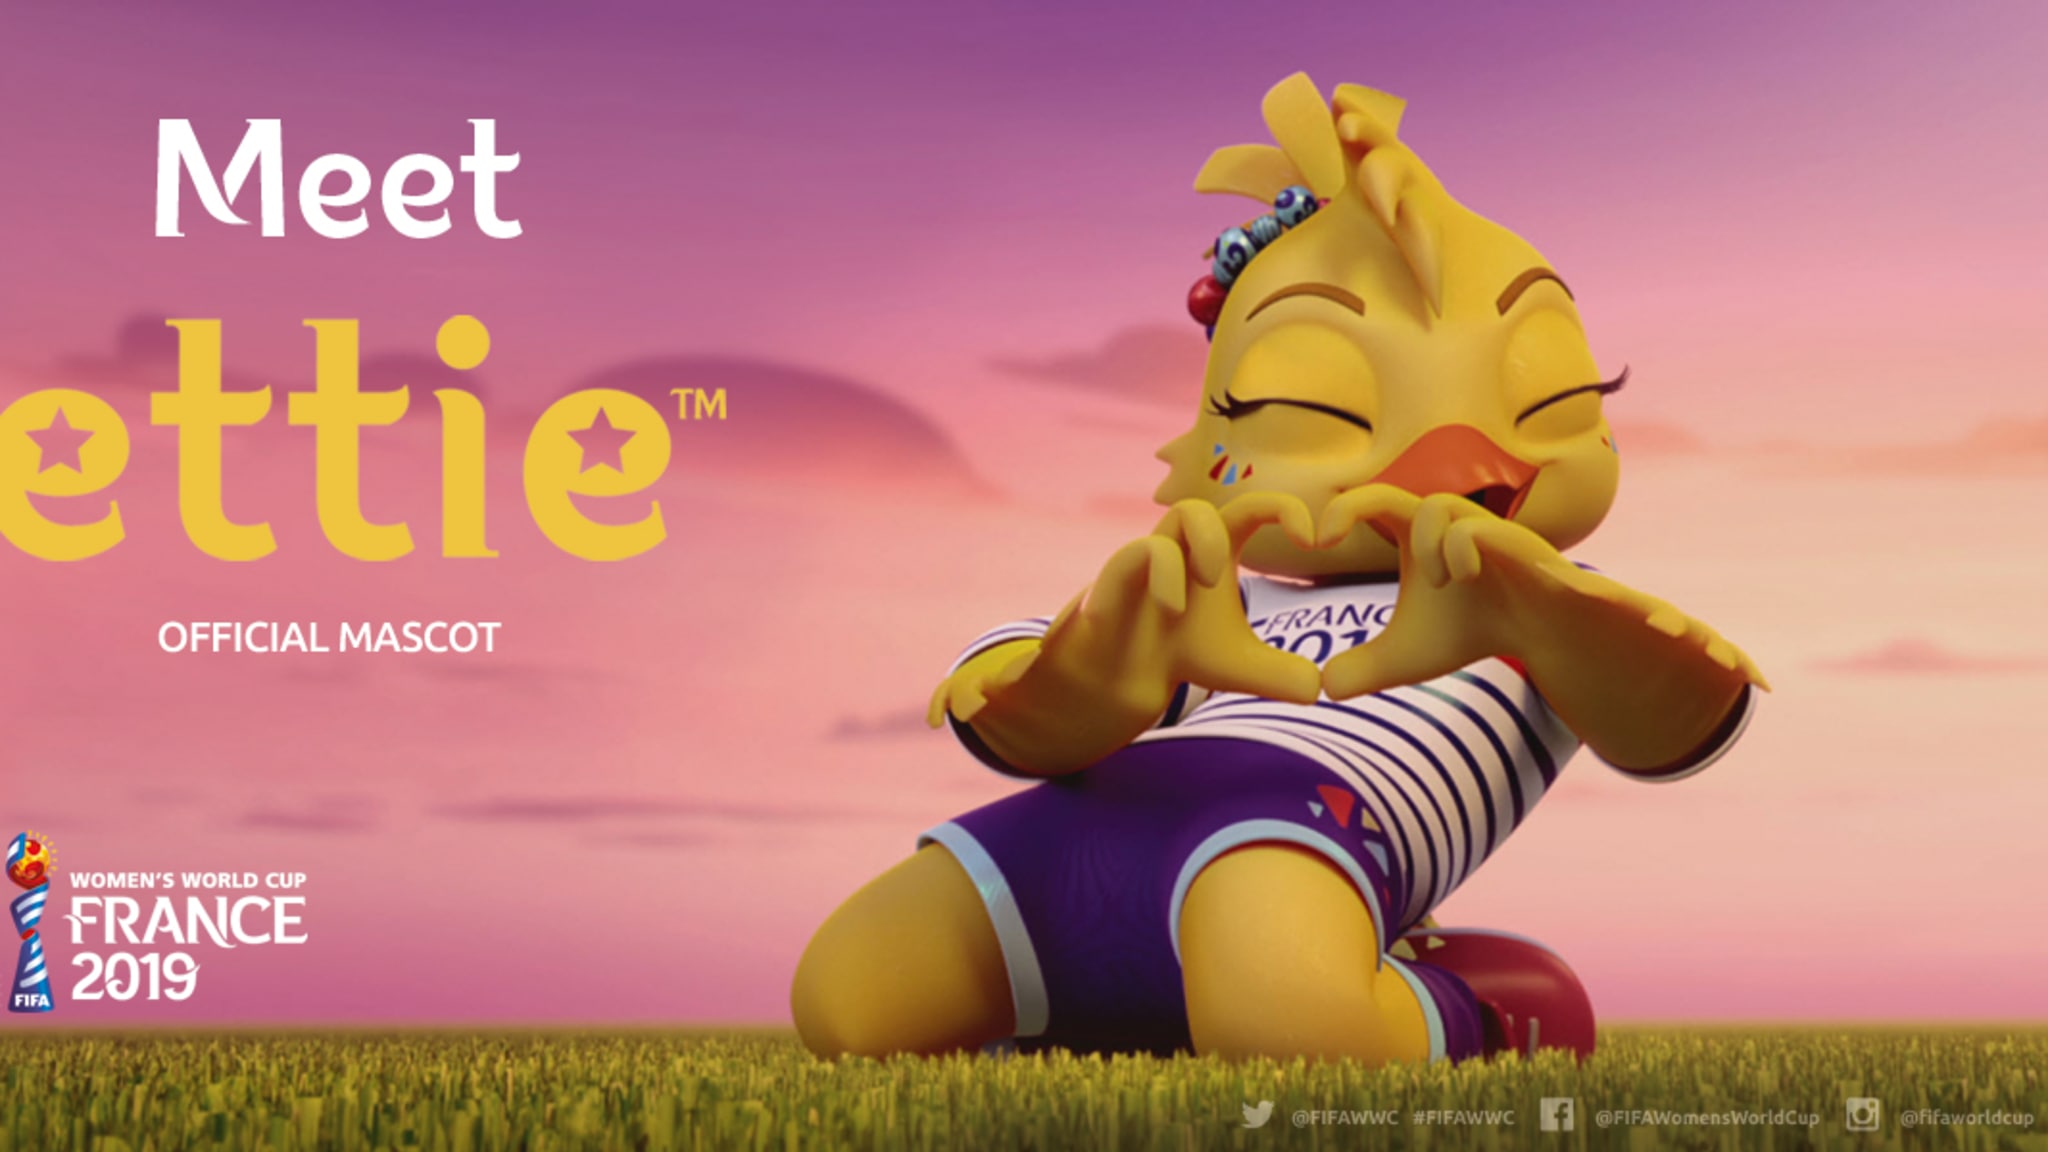 ettie official mascot wwc fifa womens world cup france 2019